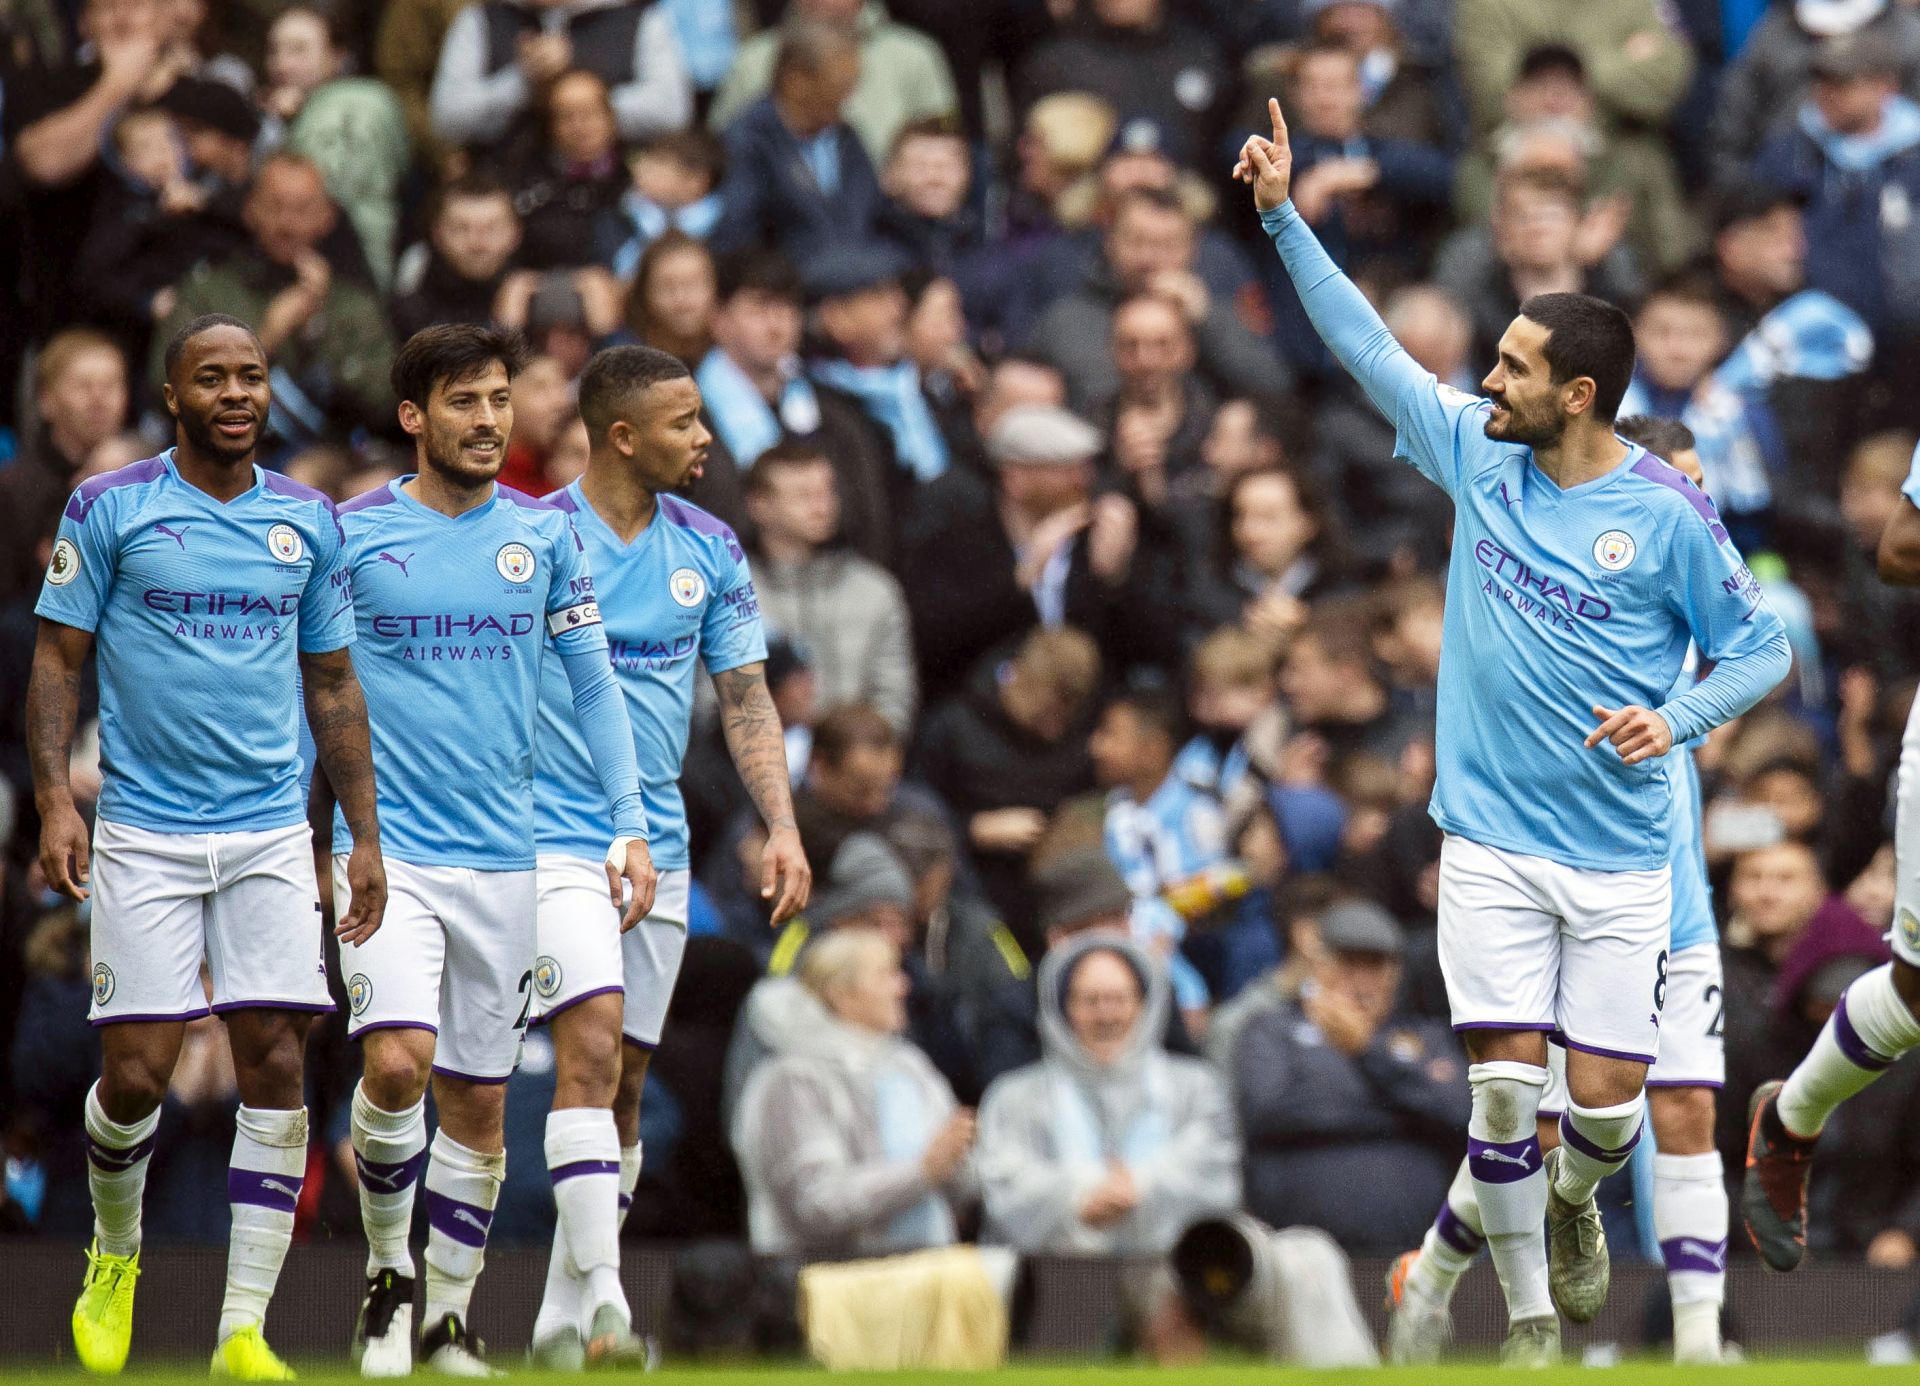 epa07951104 Manchester City's Ilkay Guendogan celebrates after scoring the 3-0 lead during the English Premier League soccer match between Manchester City and Aston Villa in Manchester, Britain, 26 October 2019.  EPA/PETER POWELL EDITORIAL USE ONLY. No use with unauthorized audio, video, data, fixture lists, club/league logos or 'live' services. Online in-match use limited to 120 images, no video emulation. No use in betting, games or single club/league/player publications